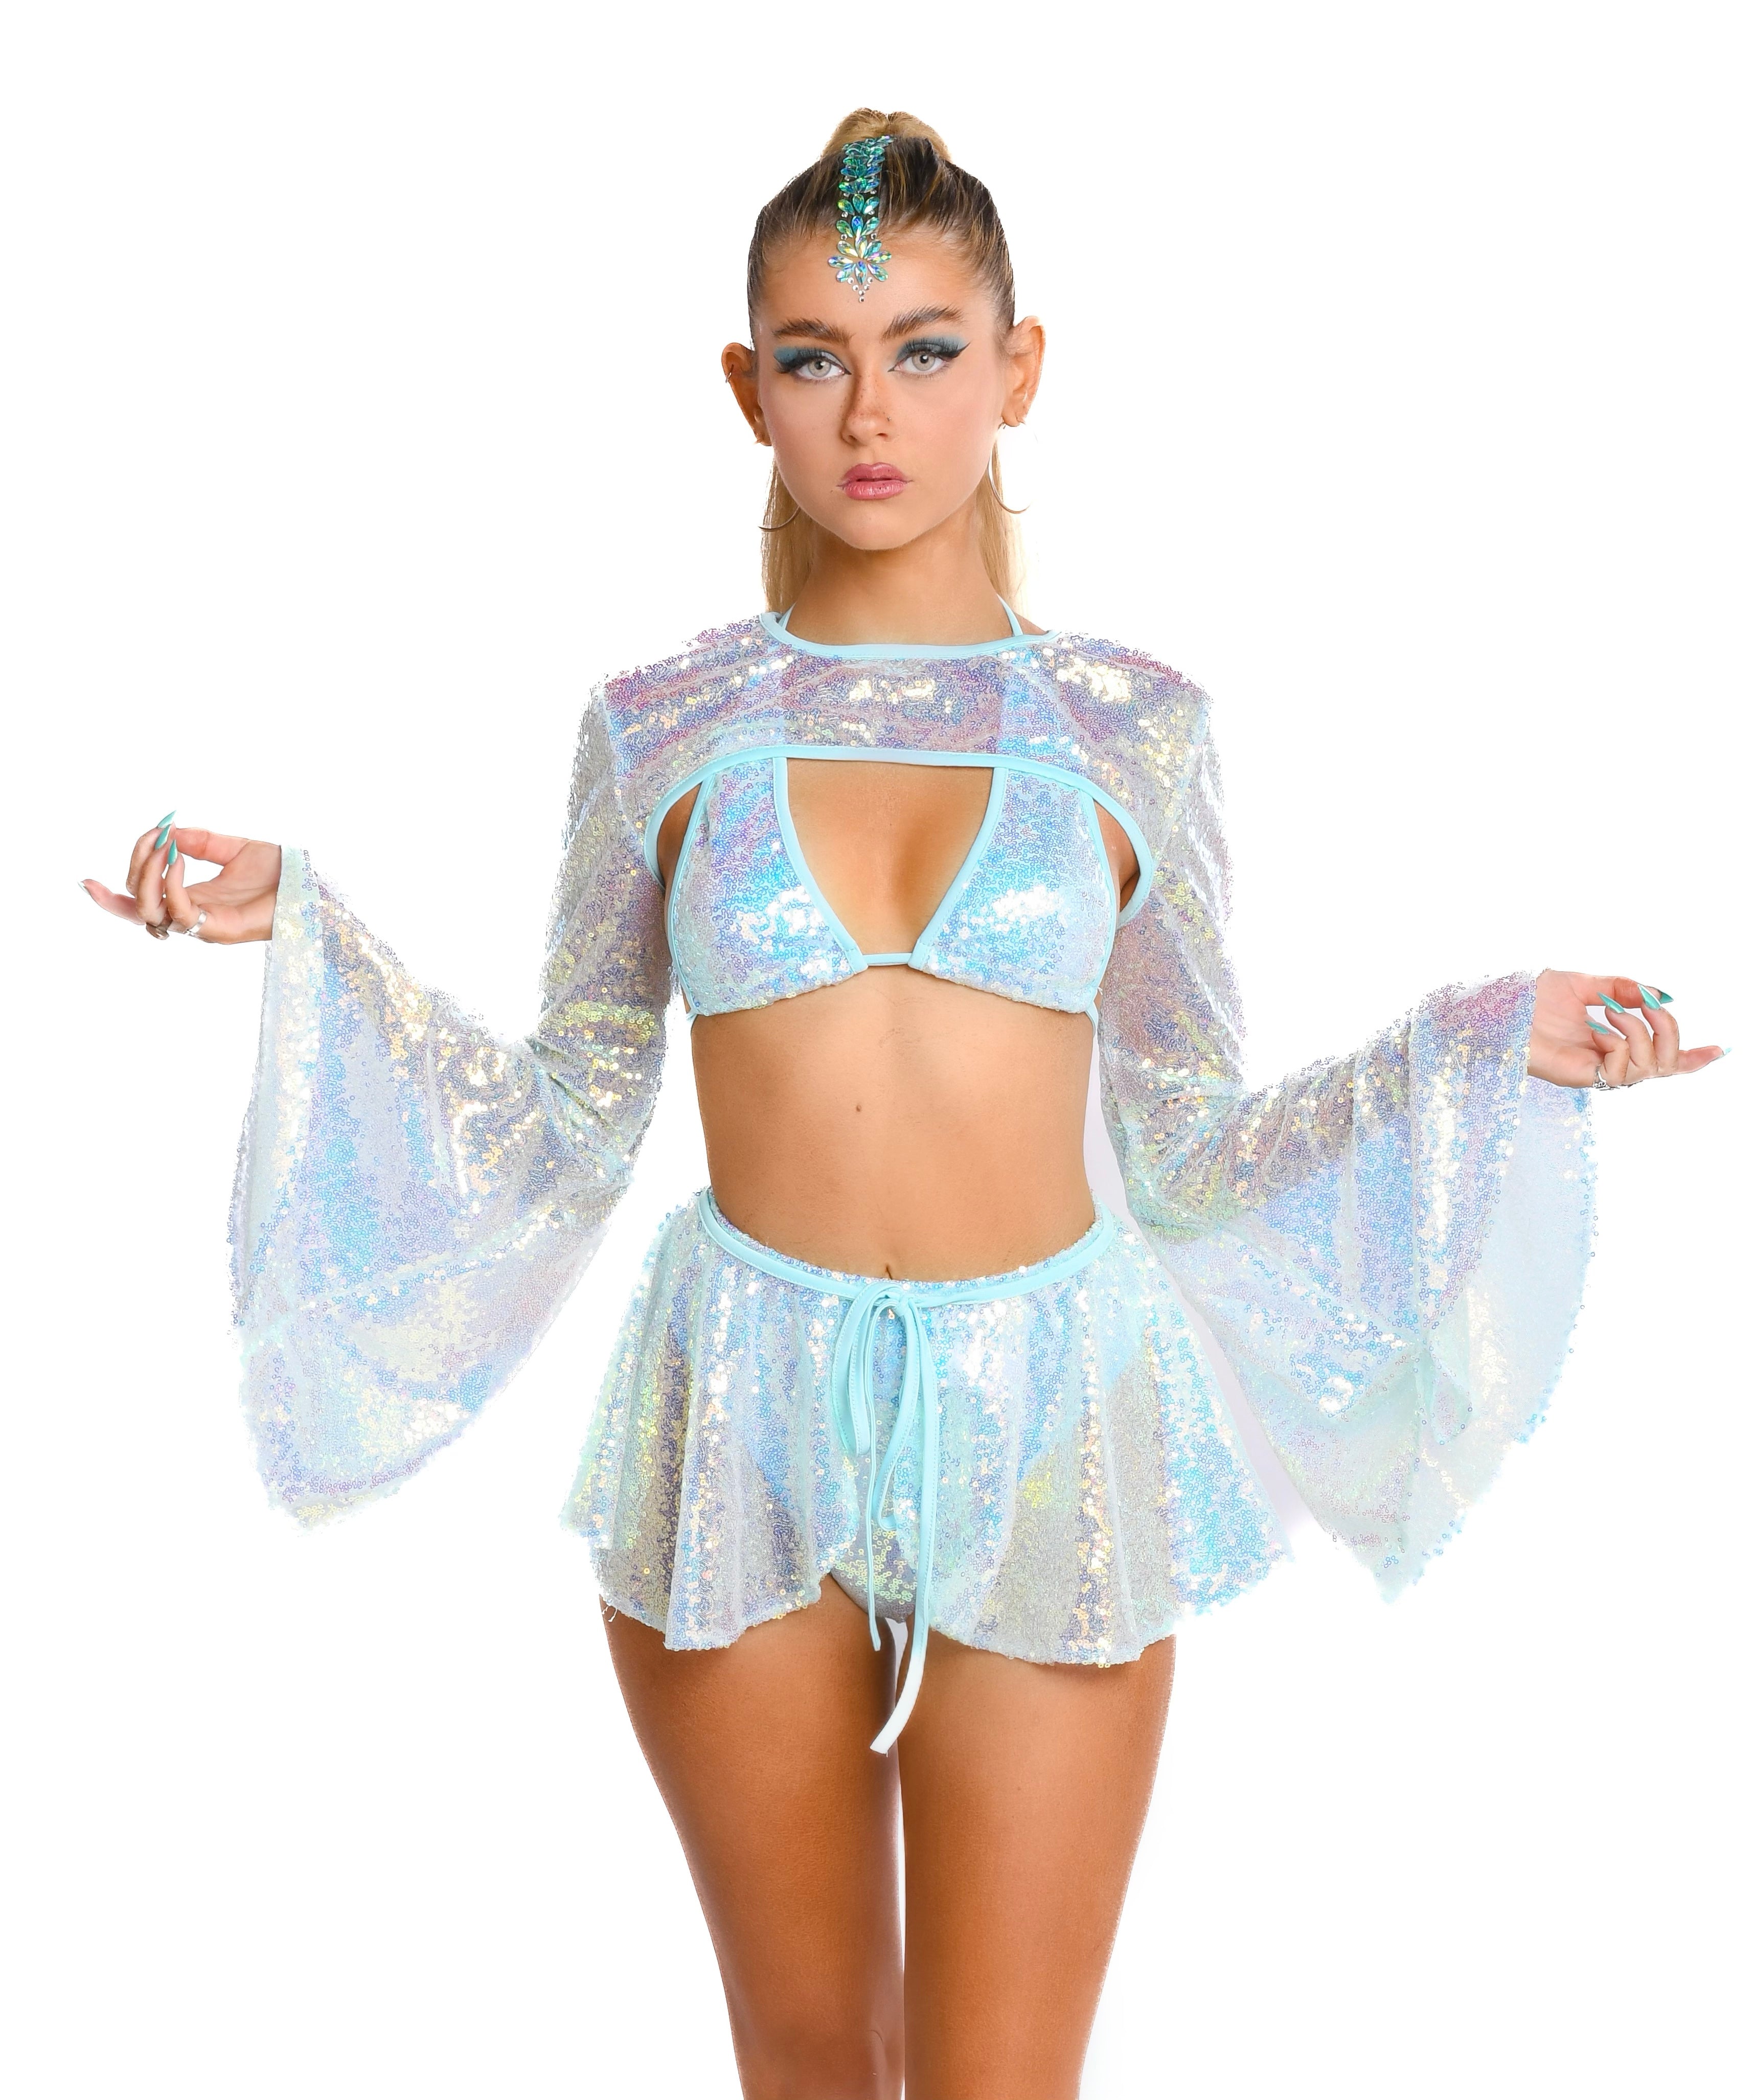 Women Cute Rave Outfits Glitter Halter Tops And Mini Skirt Arm Sleeves, Cute Rave Tops